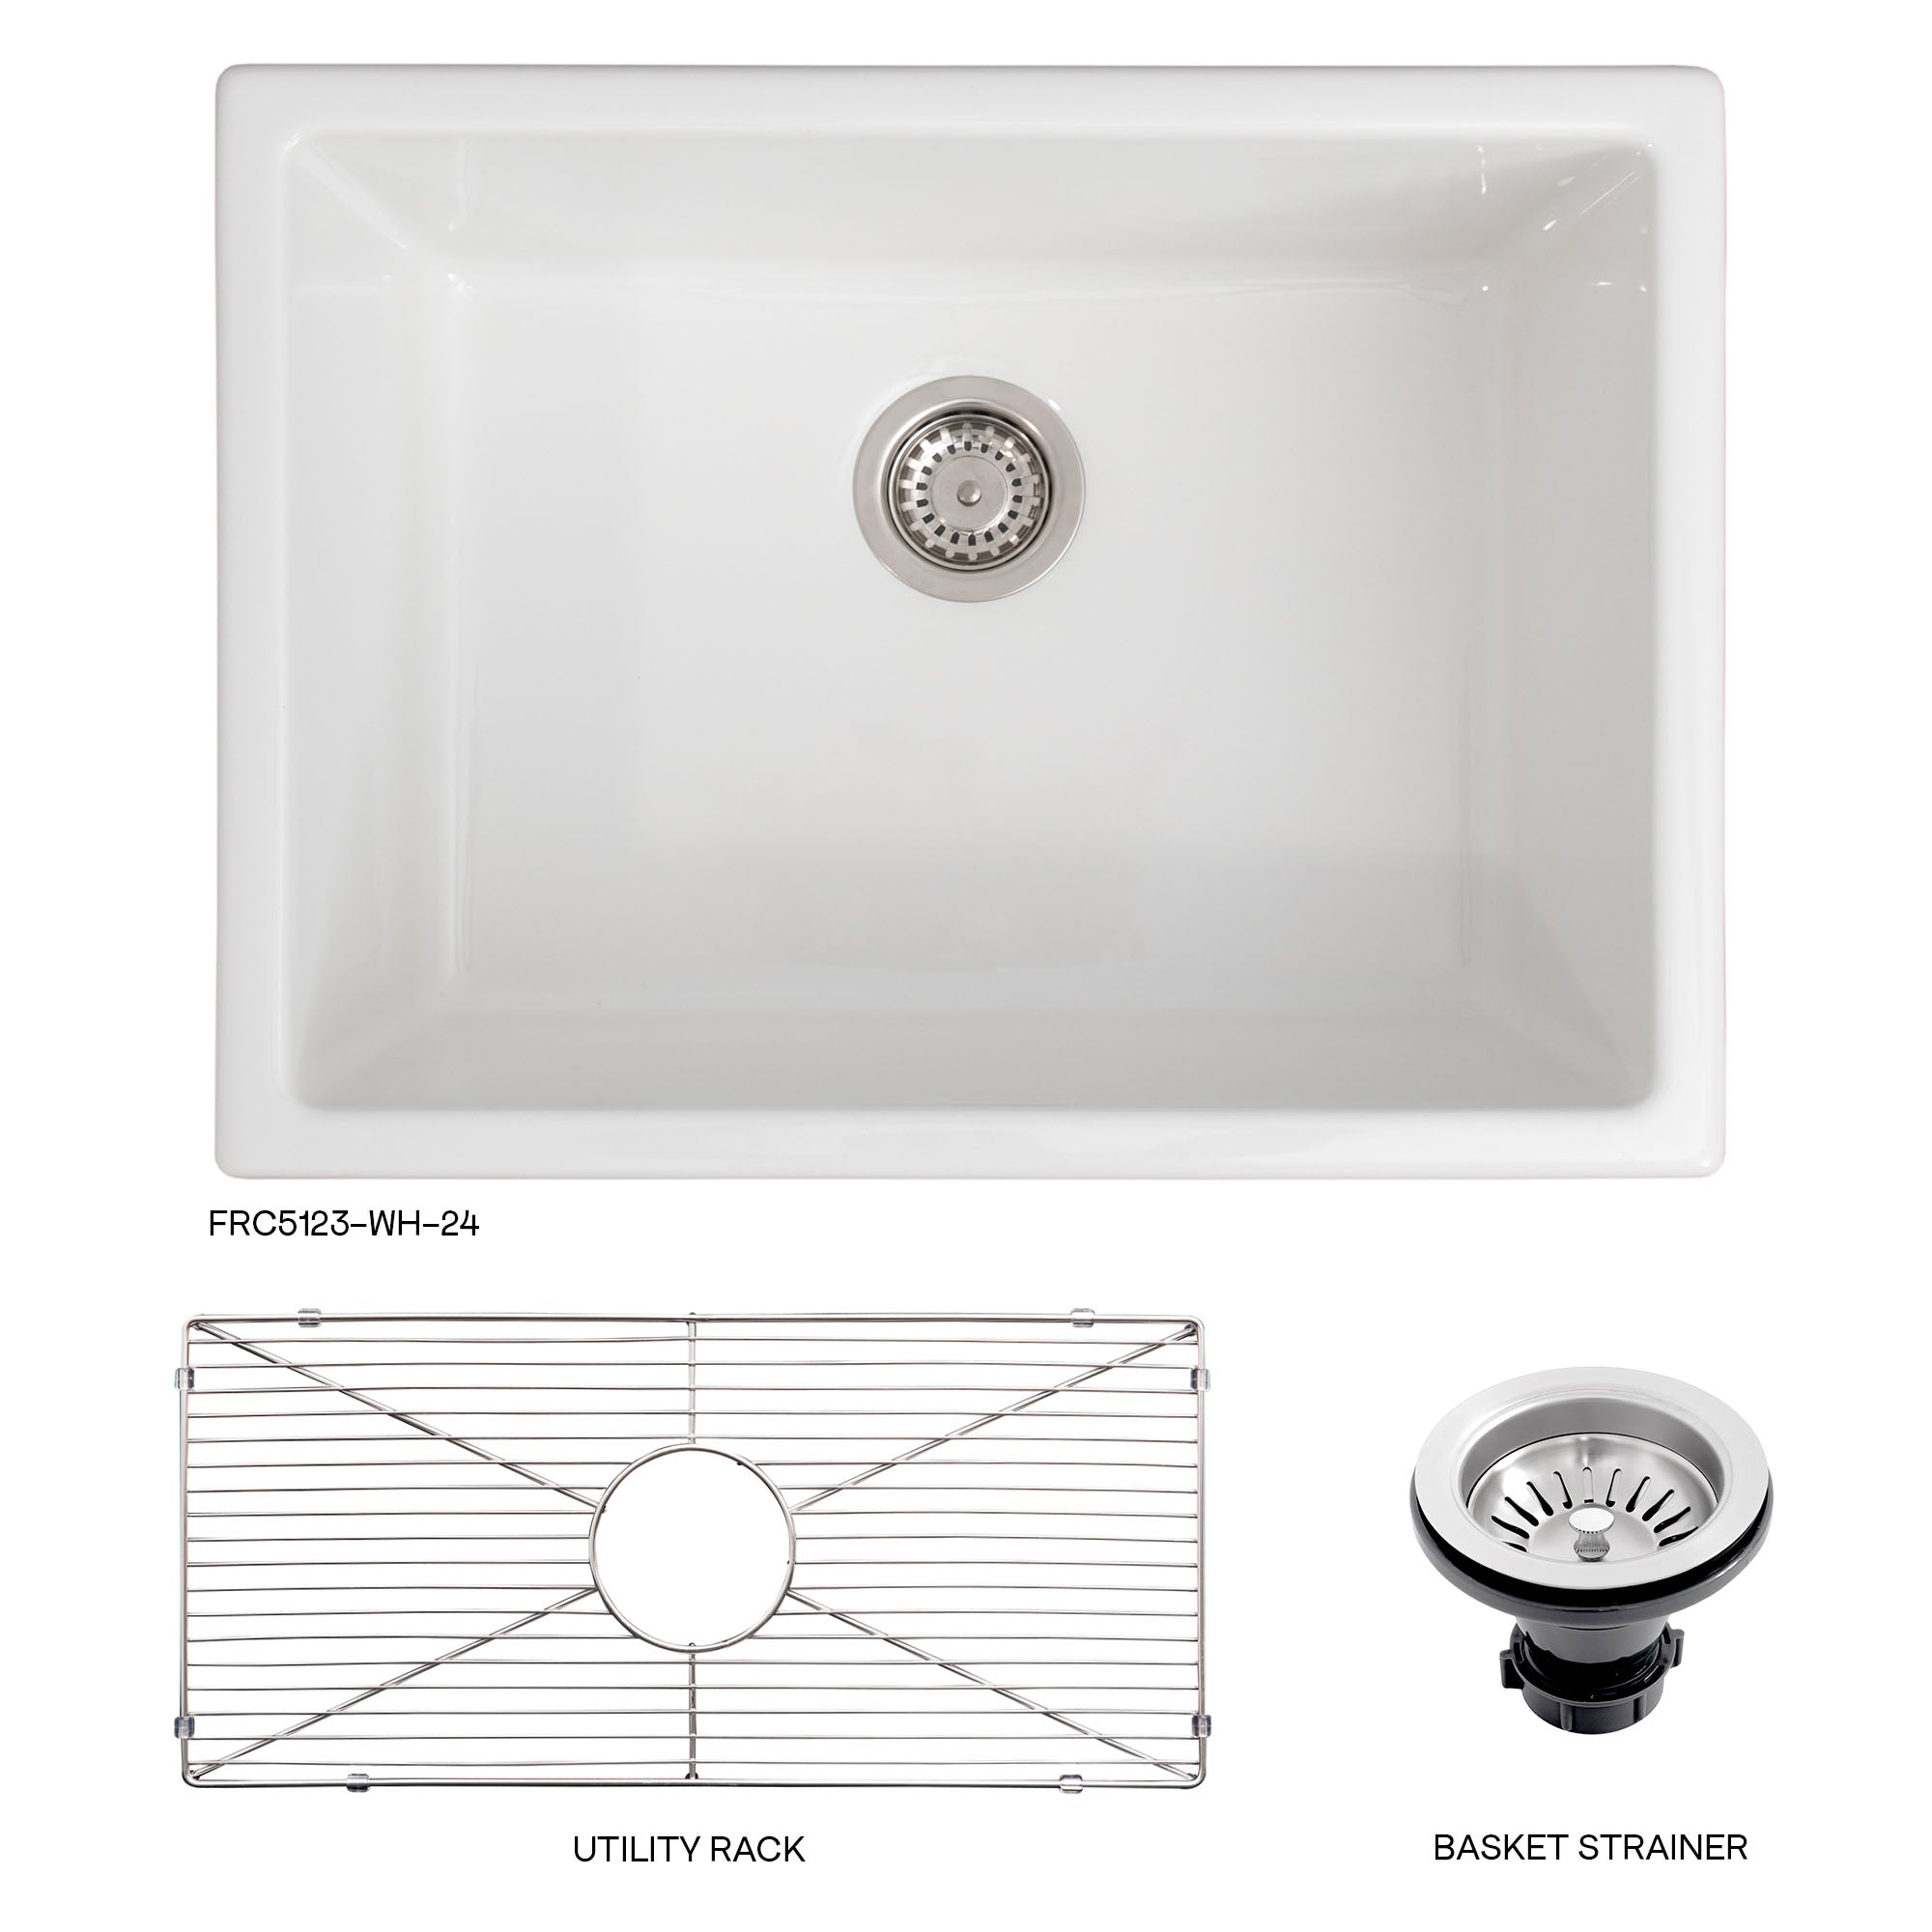 ZLINE 24" Rome Dual Mount Single Bowl Fireclay Kitchen Sink with Bottom Grid in White Gloss (FRC5123-WH-24)